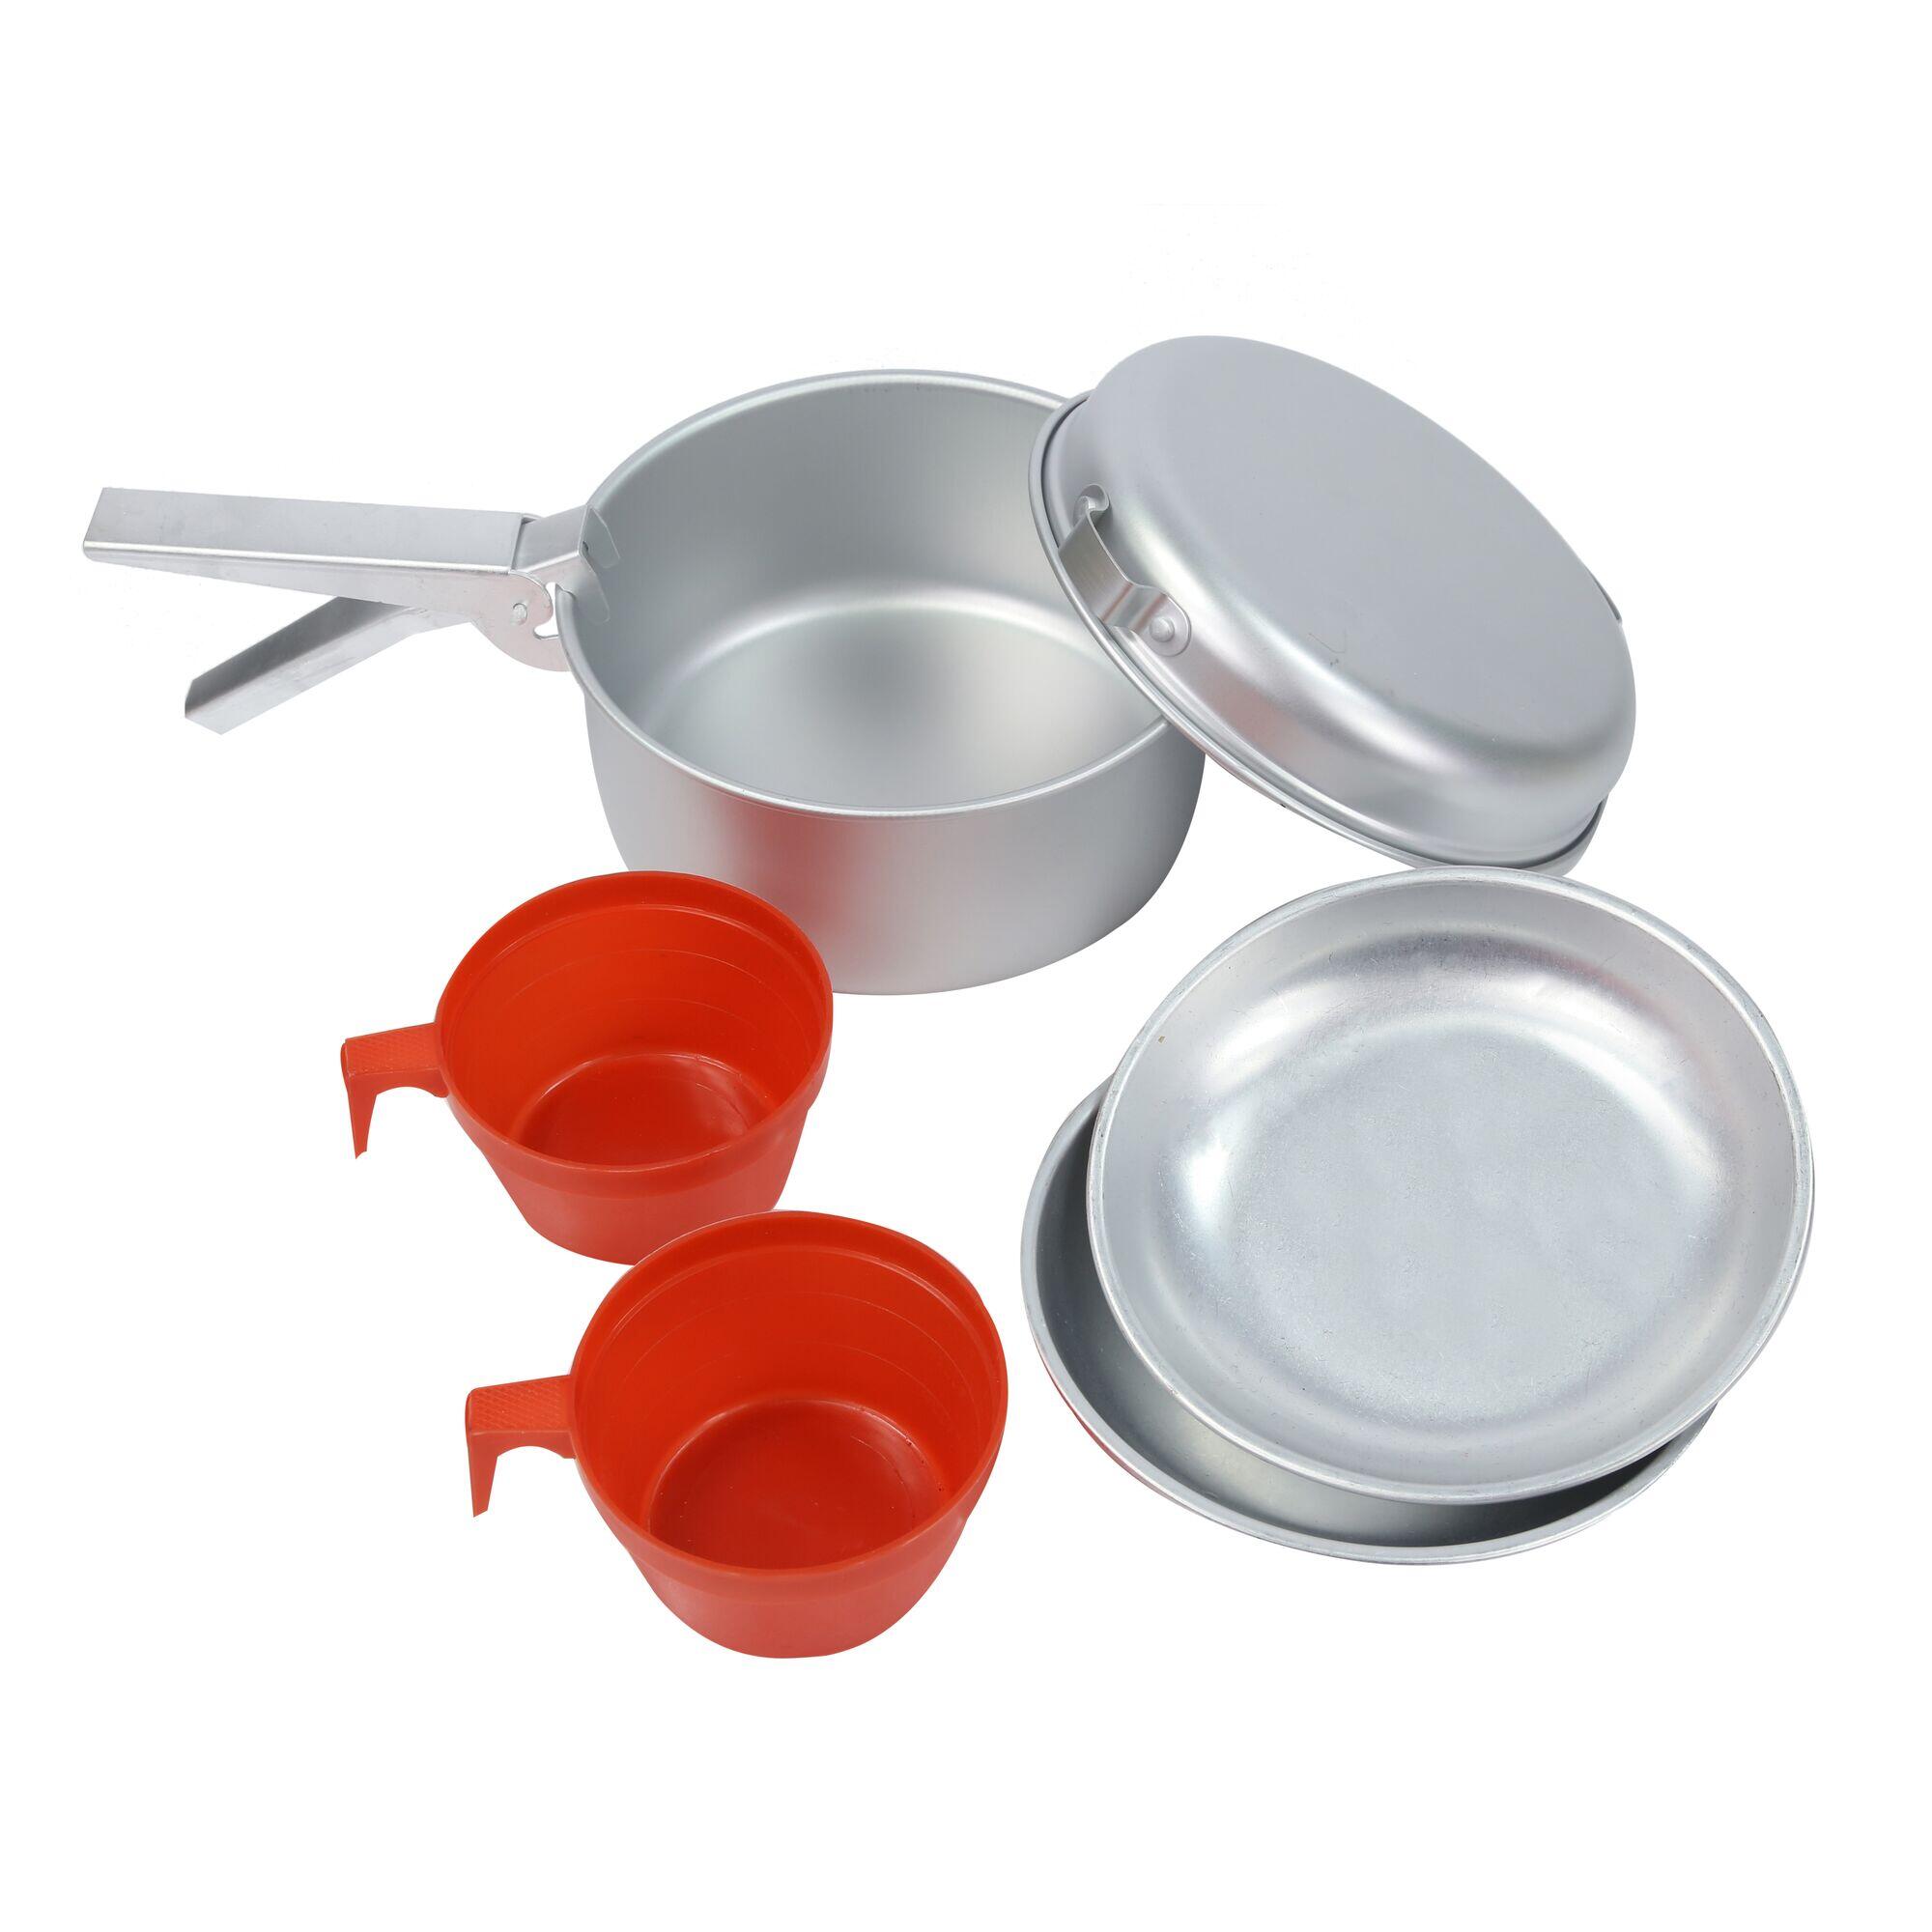 REGATTA 2 Person Adults' Camping Cookset - Silver